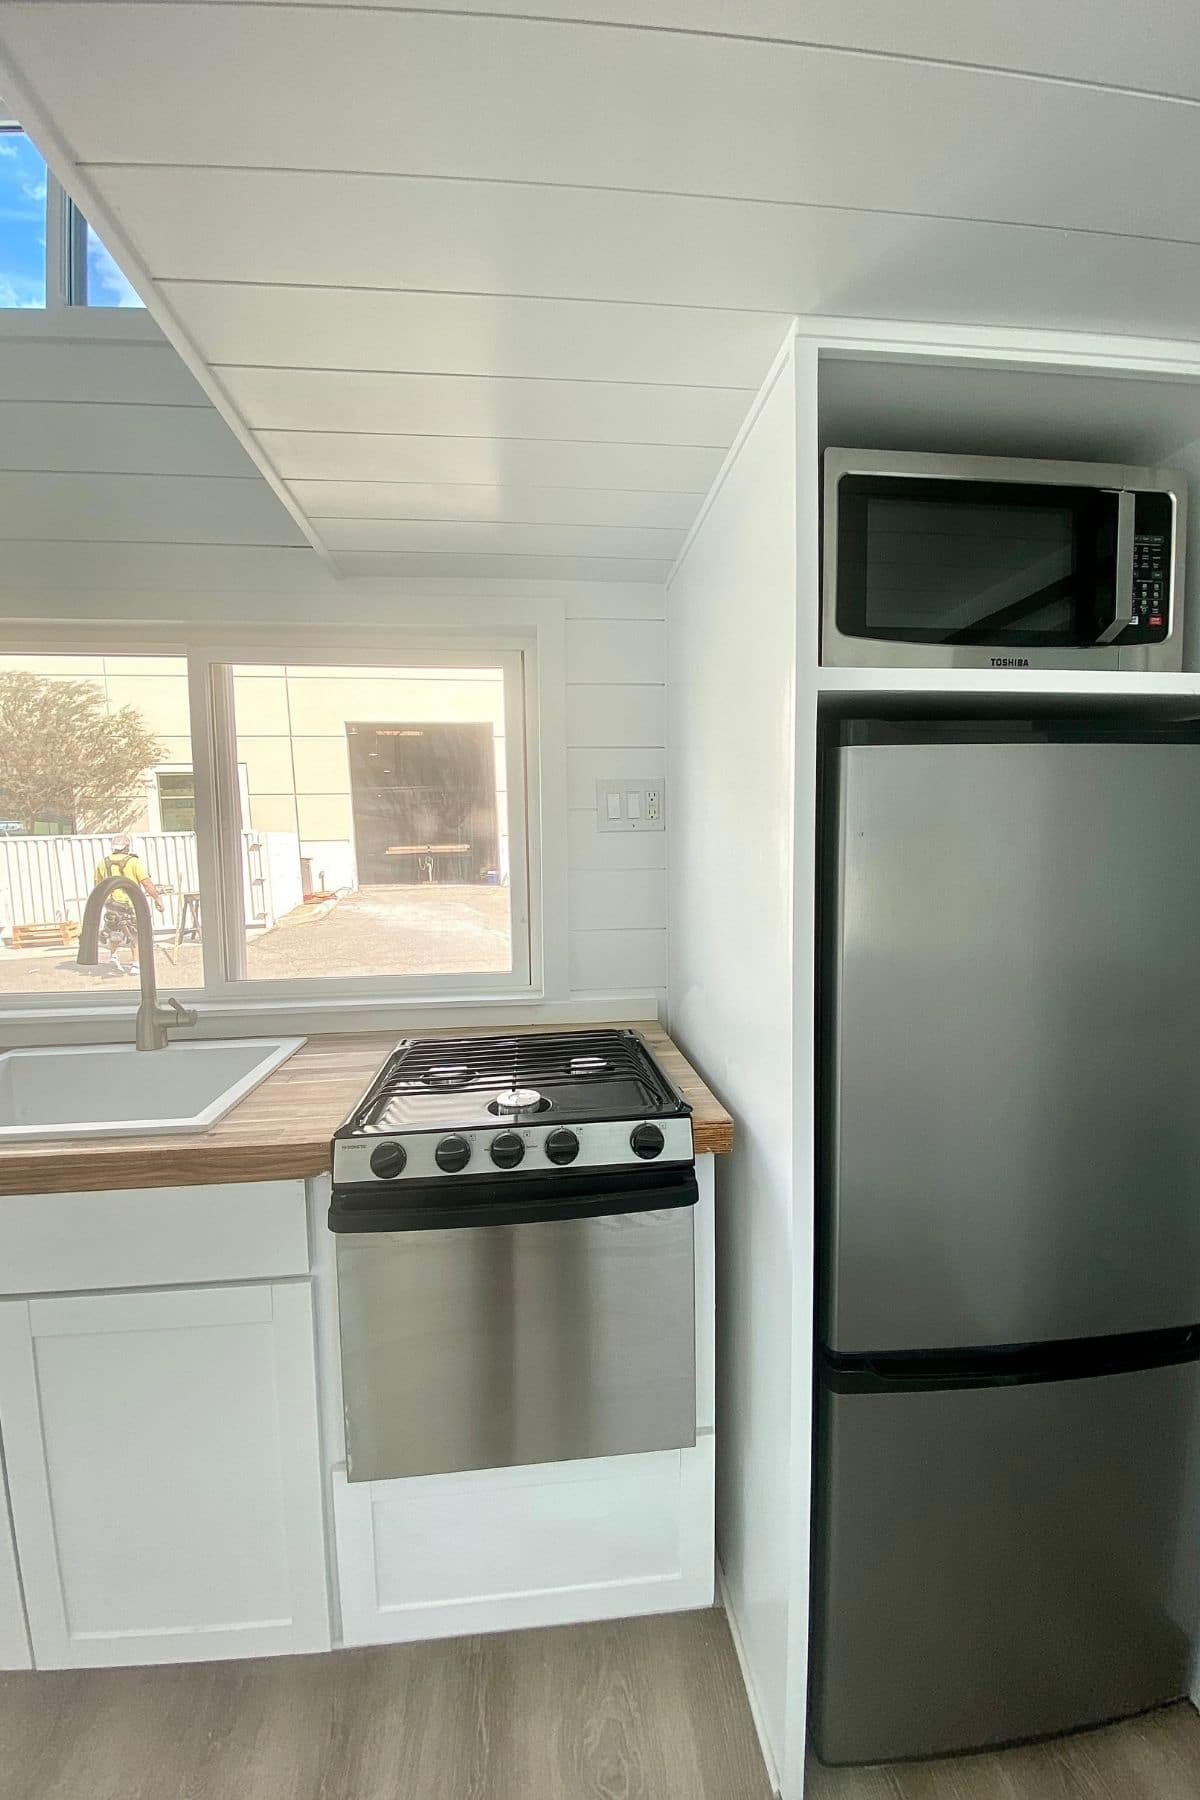 Stainless steel refrigerator in white cabinet next to rv sized stove by white sink